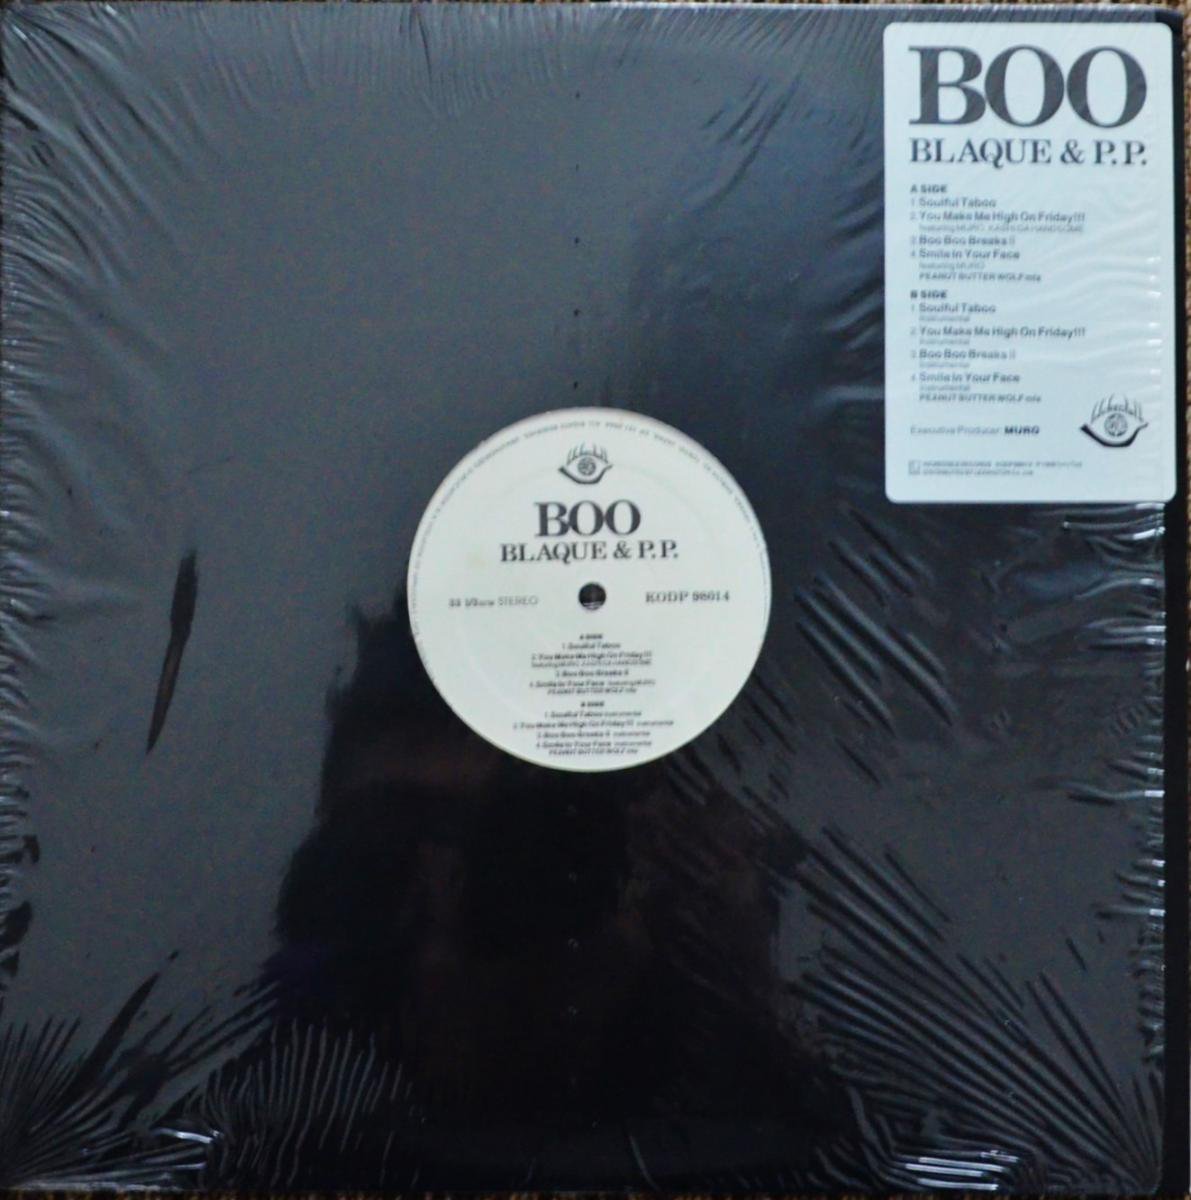 BOO / BLAQUE & P.P. EP (inc,SMILE IN YOUR FACE - PEANUT BUTTER WOLF RMX...) (12